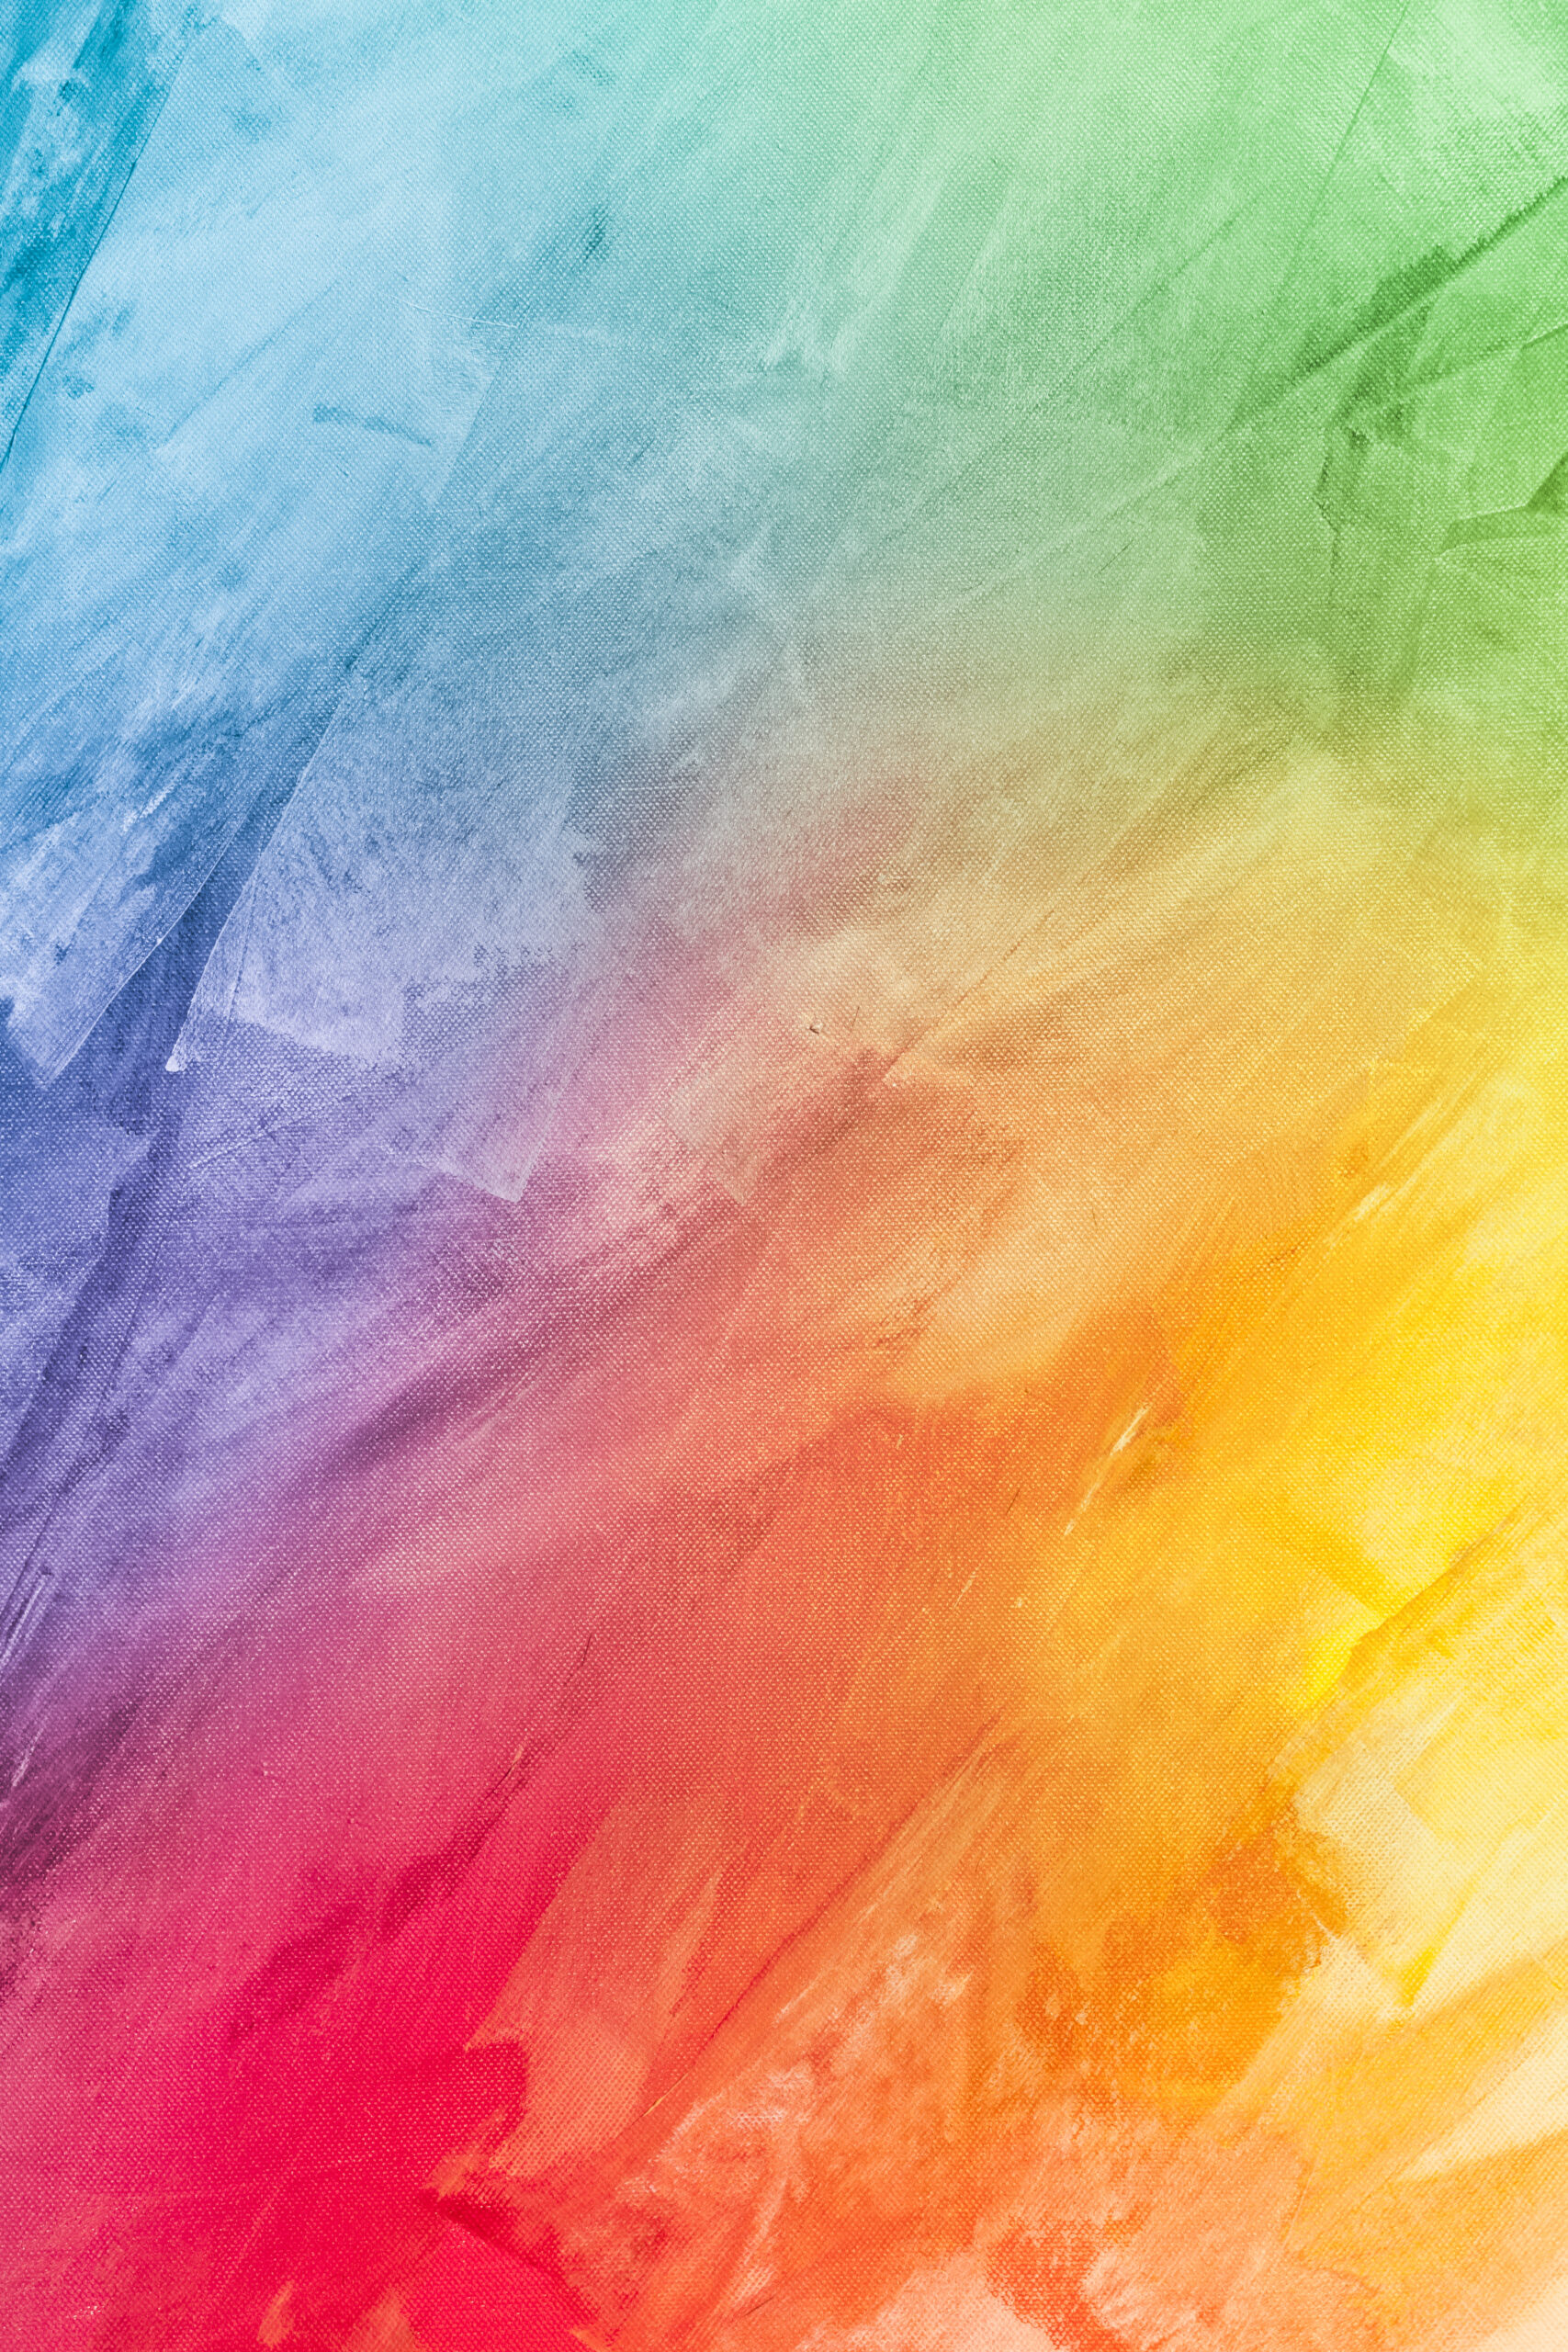 Textured rainbow painted background